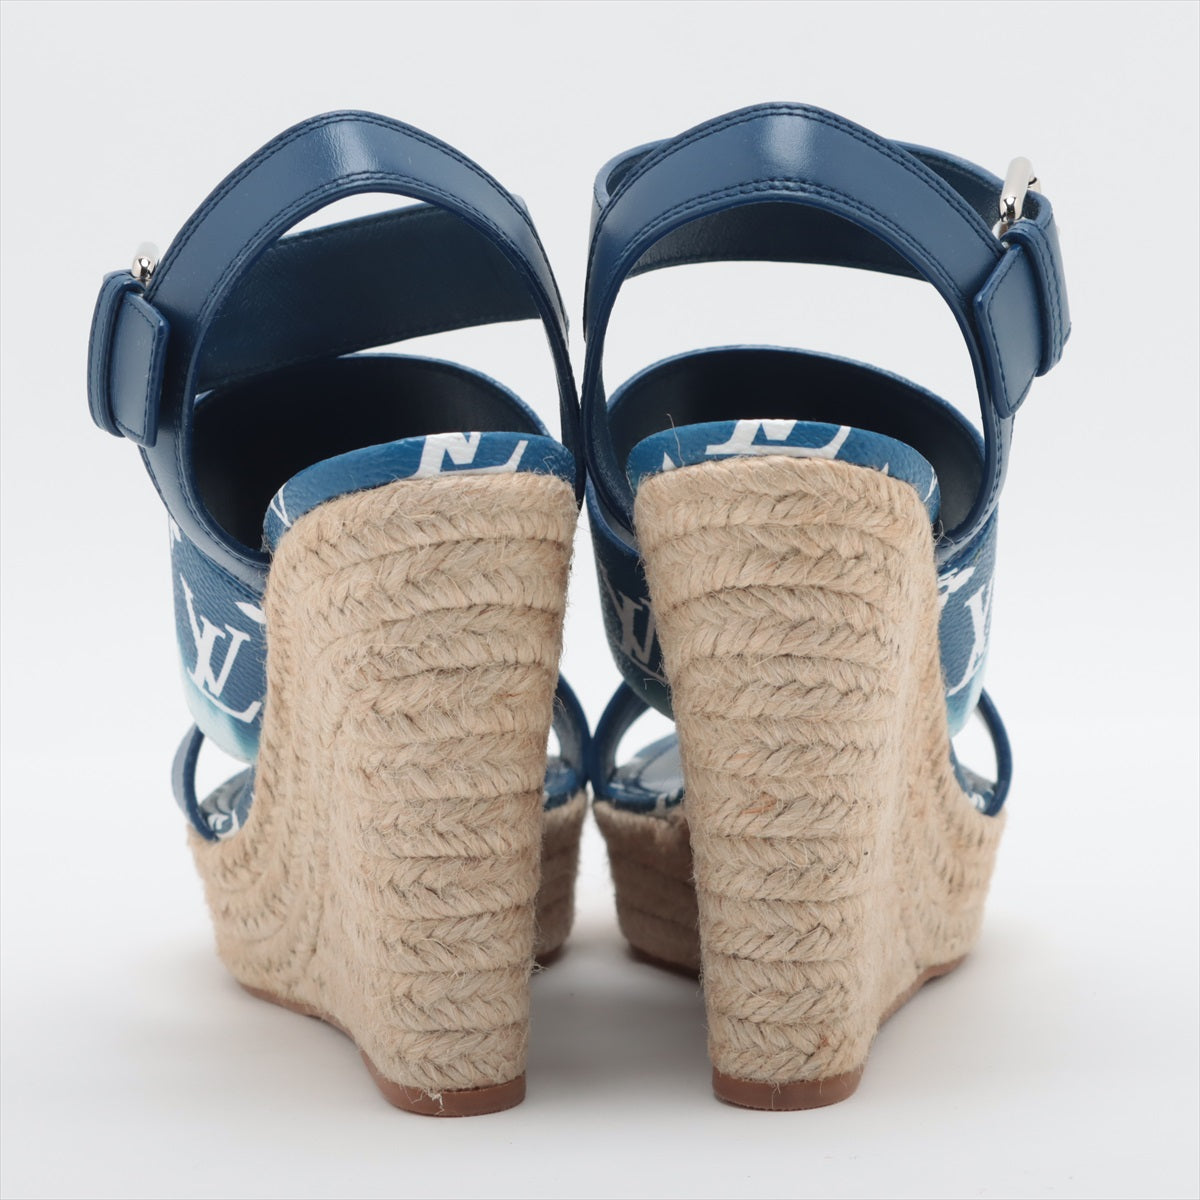 Louis Vuitton Starboard line 20 years PVC & leather Wedge Sole Sandals 38 Ladies' Blue x white CL0210 Monogram Espadrilles There is a V mark There is a storage bag